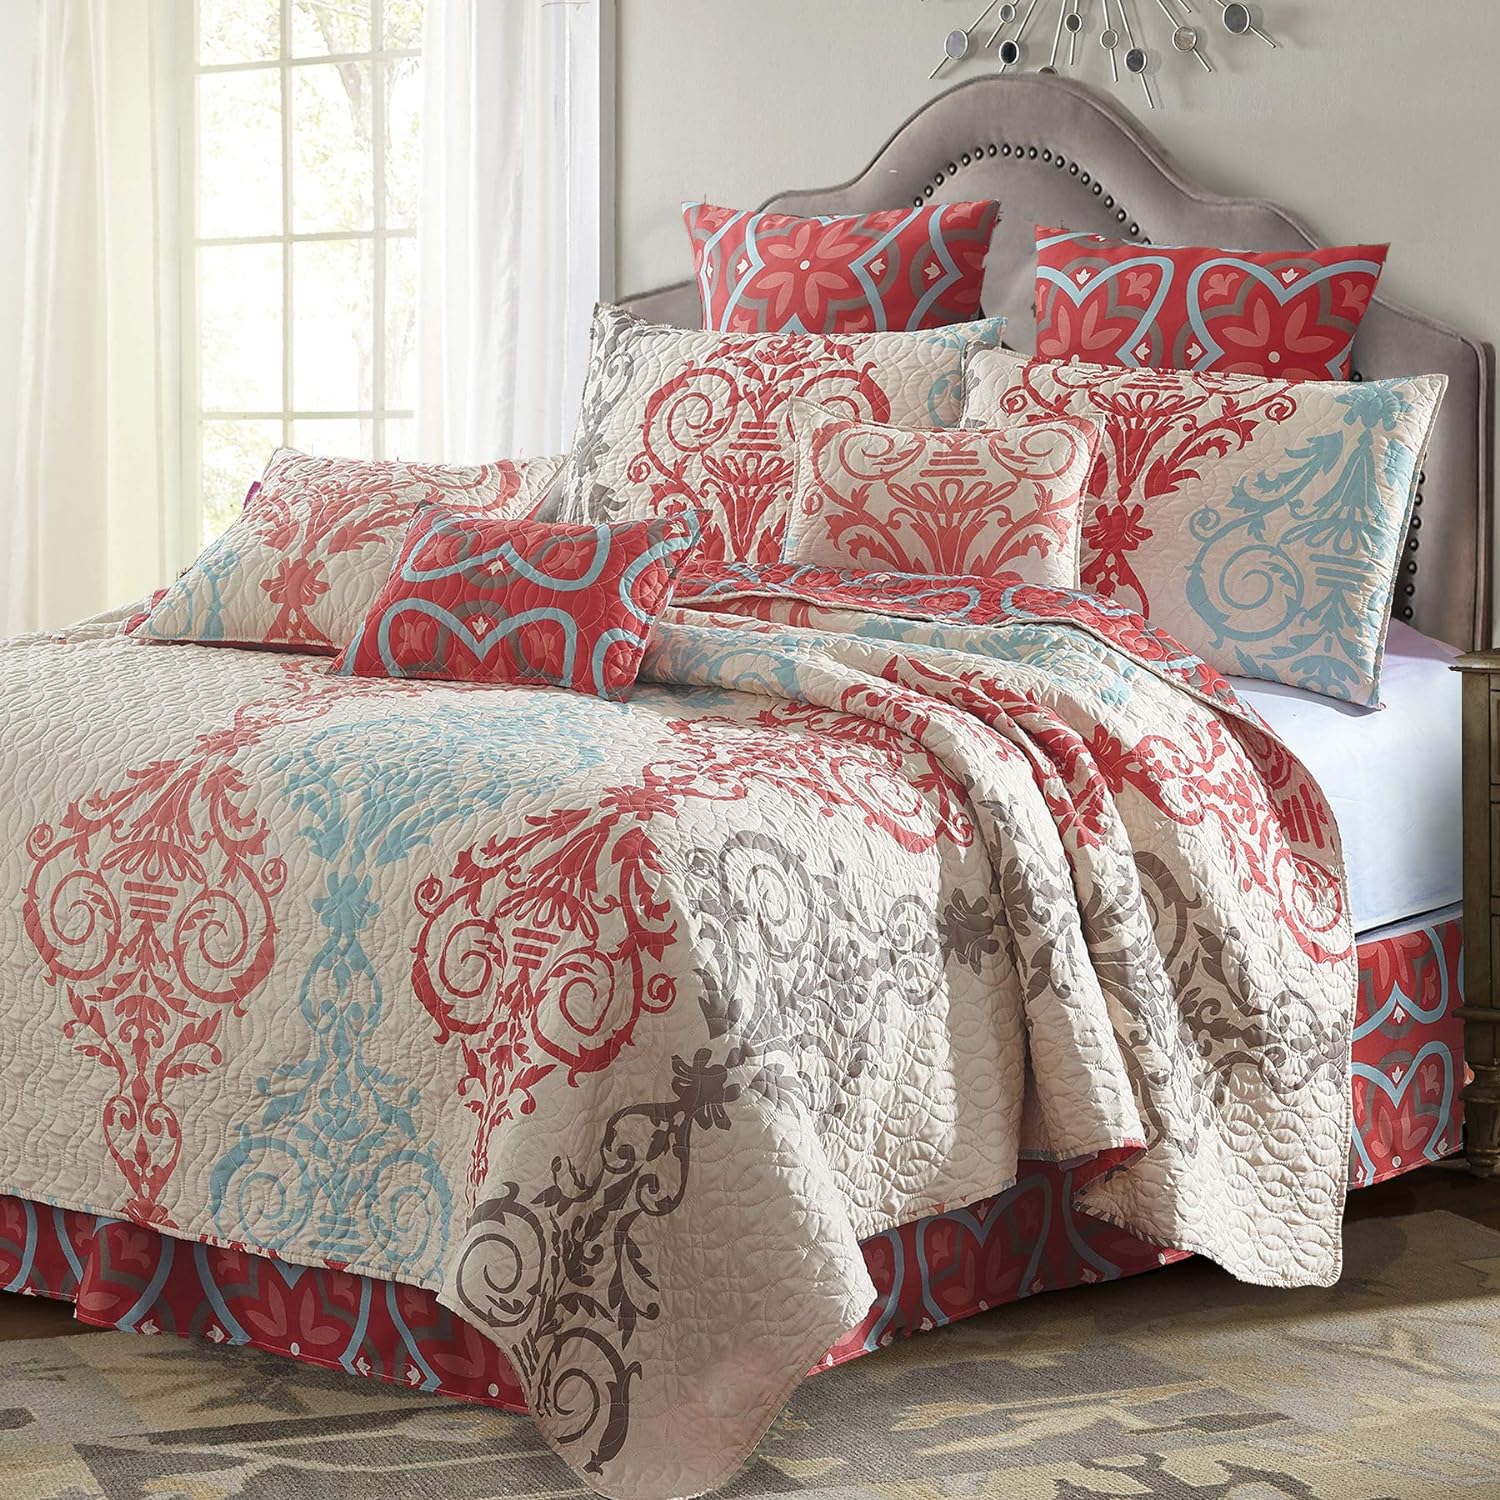 Virah Bella Quilt Bedding Set in Full/Queen Portofino Printed Lightweight Reversible Quilt with 2 Matching Pillow Shams - Cozy & Beautiful Contemporary-Themed Bedding